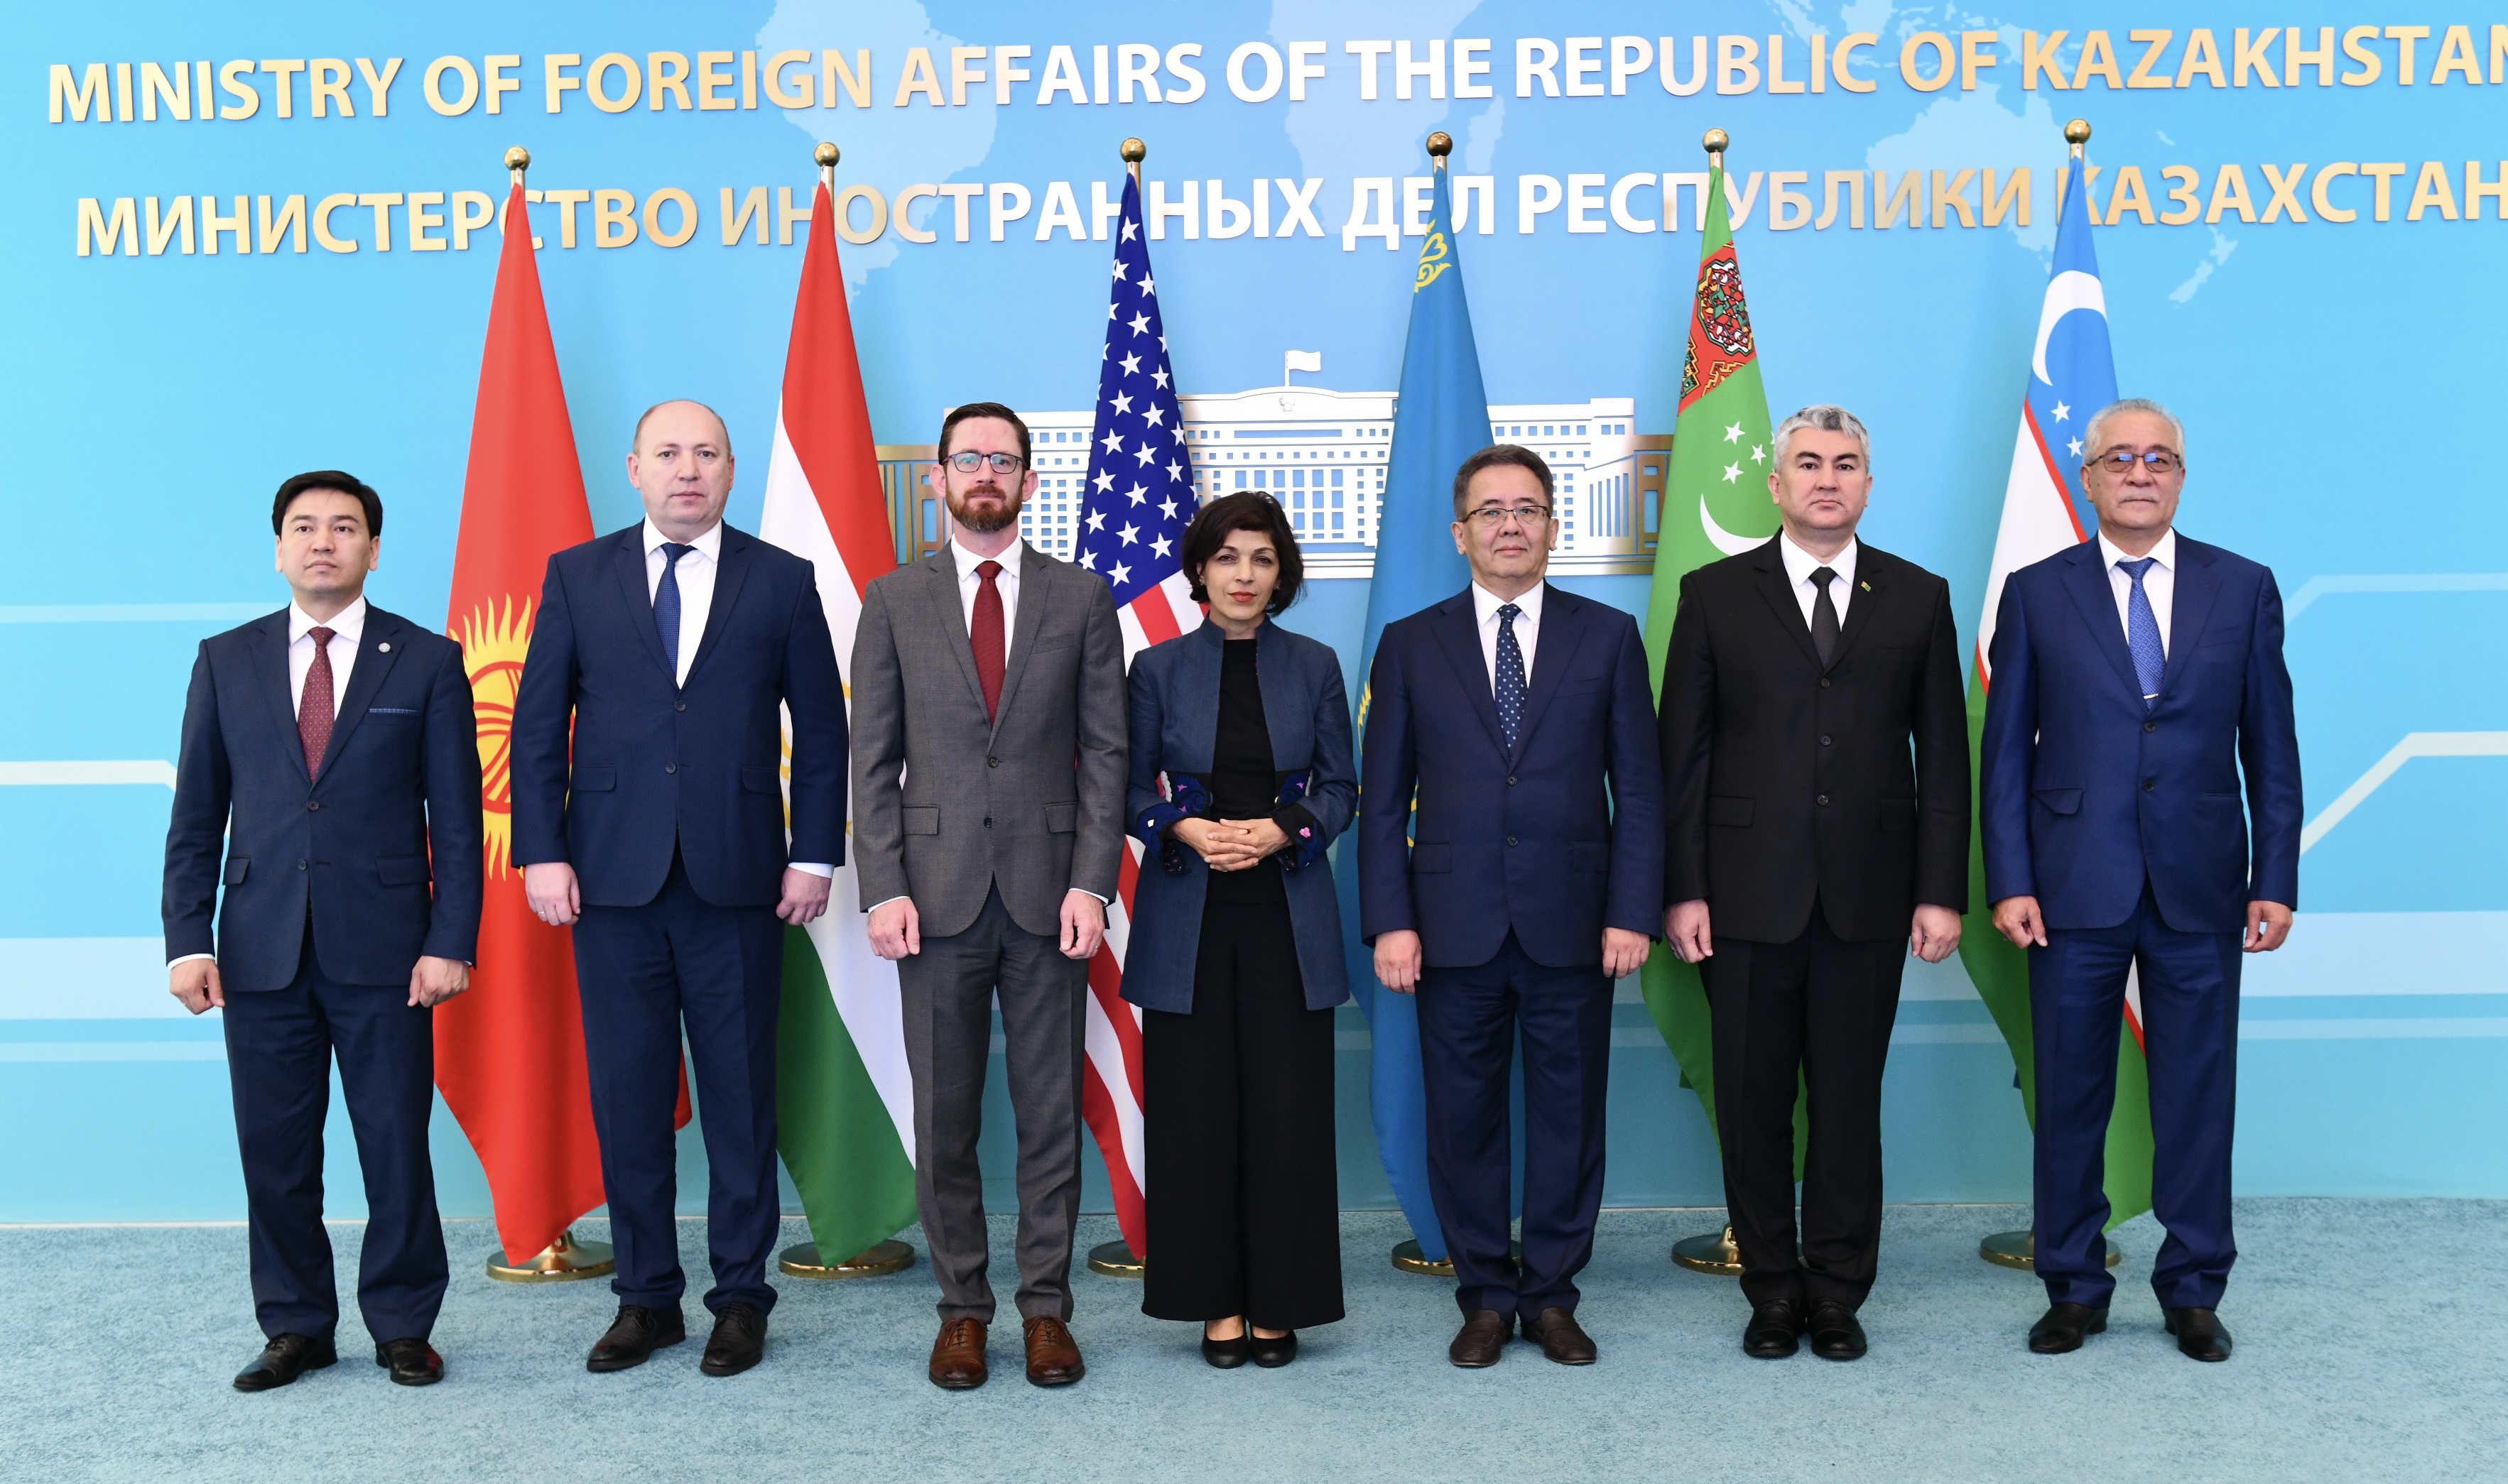 Representatives of Central Asian Countries and United States Discussed Wide Range of Issues at Special Session on Afghanistan